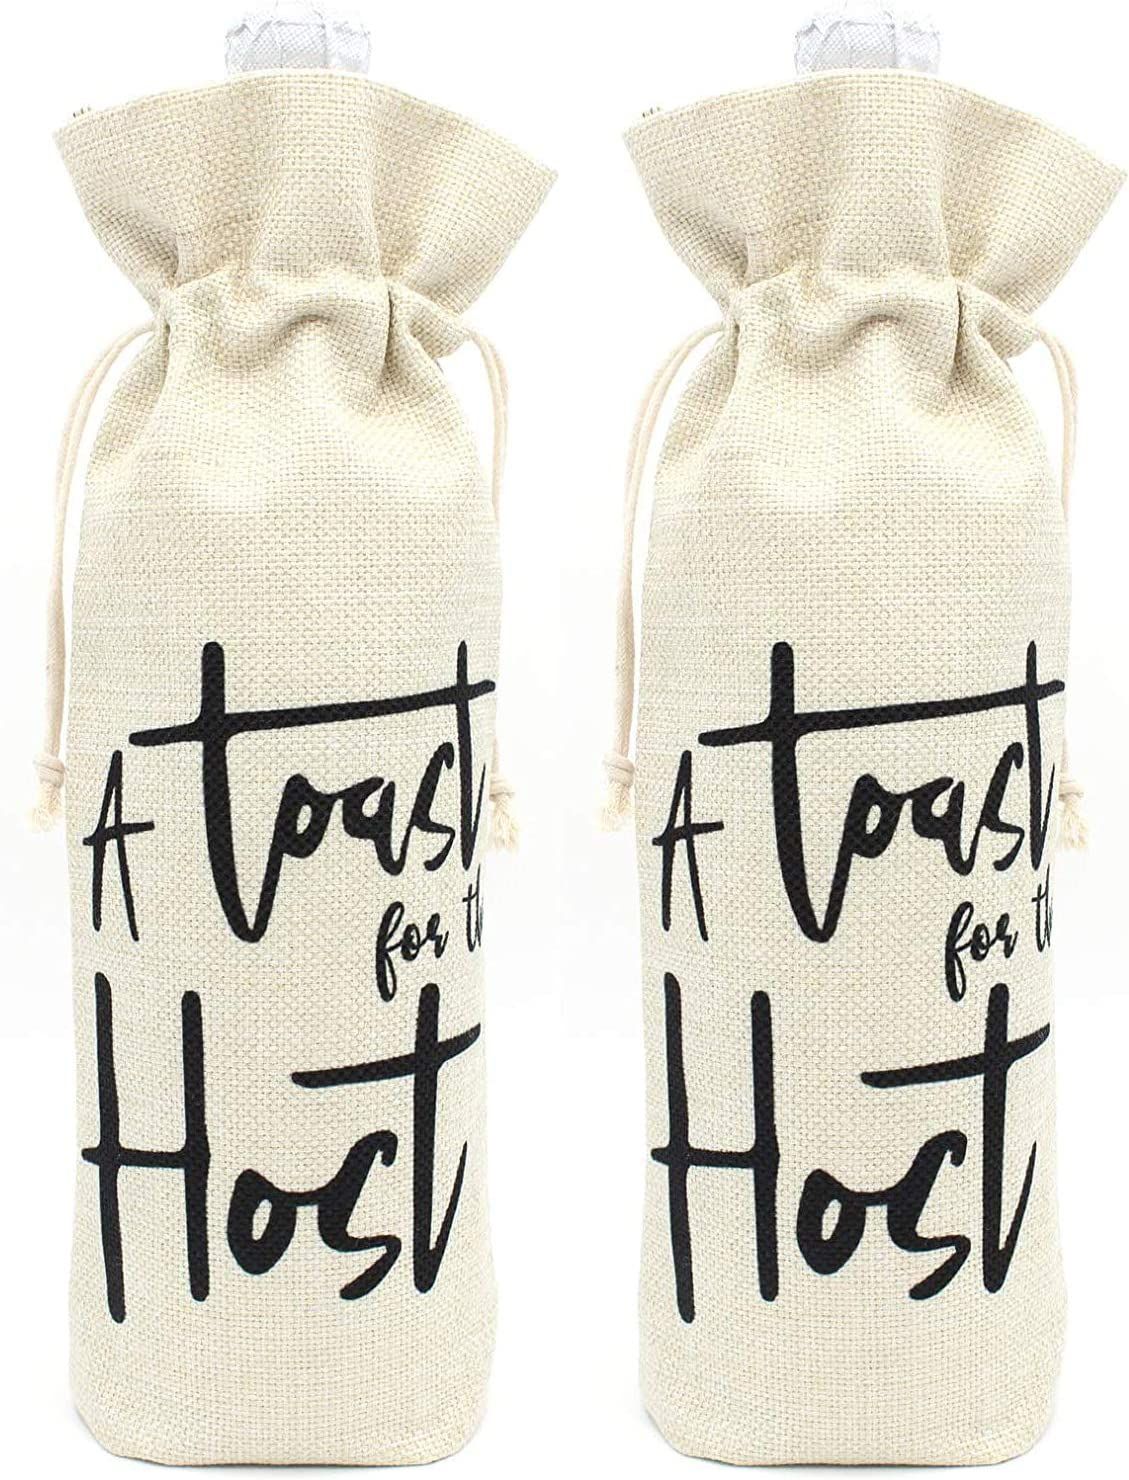 Amazon.com: A Toast for the Host Wine bottle Bags-Gift for Housewarming Party Bridal Shower Gift ... | Amazon (US)